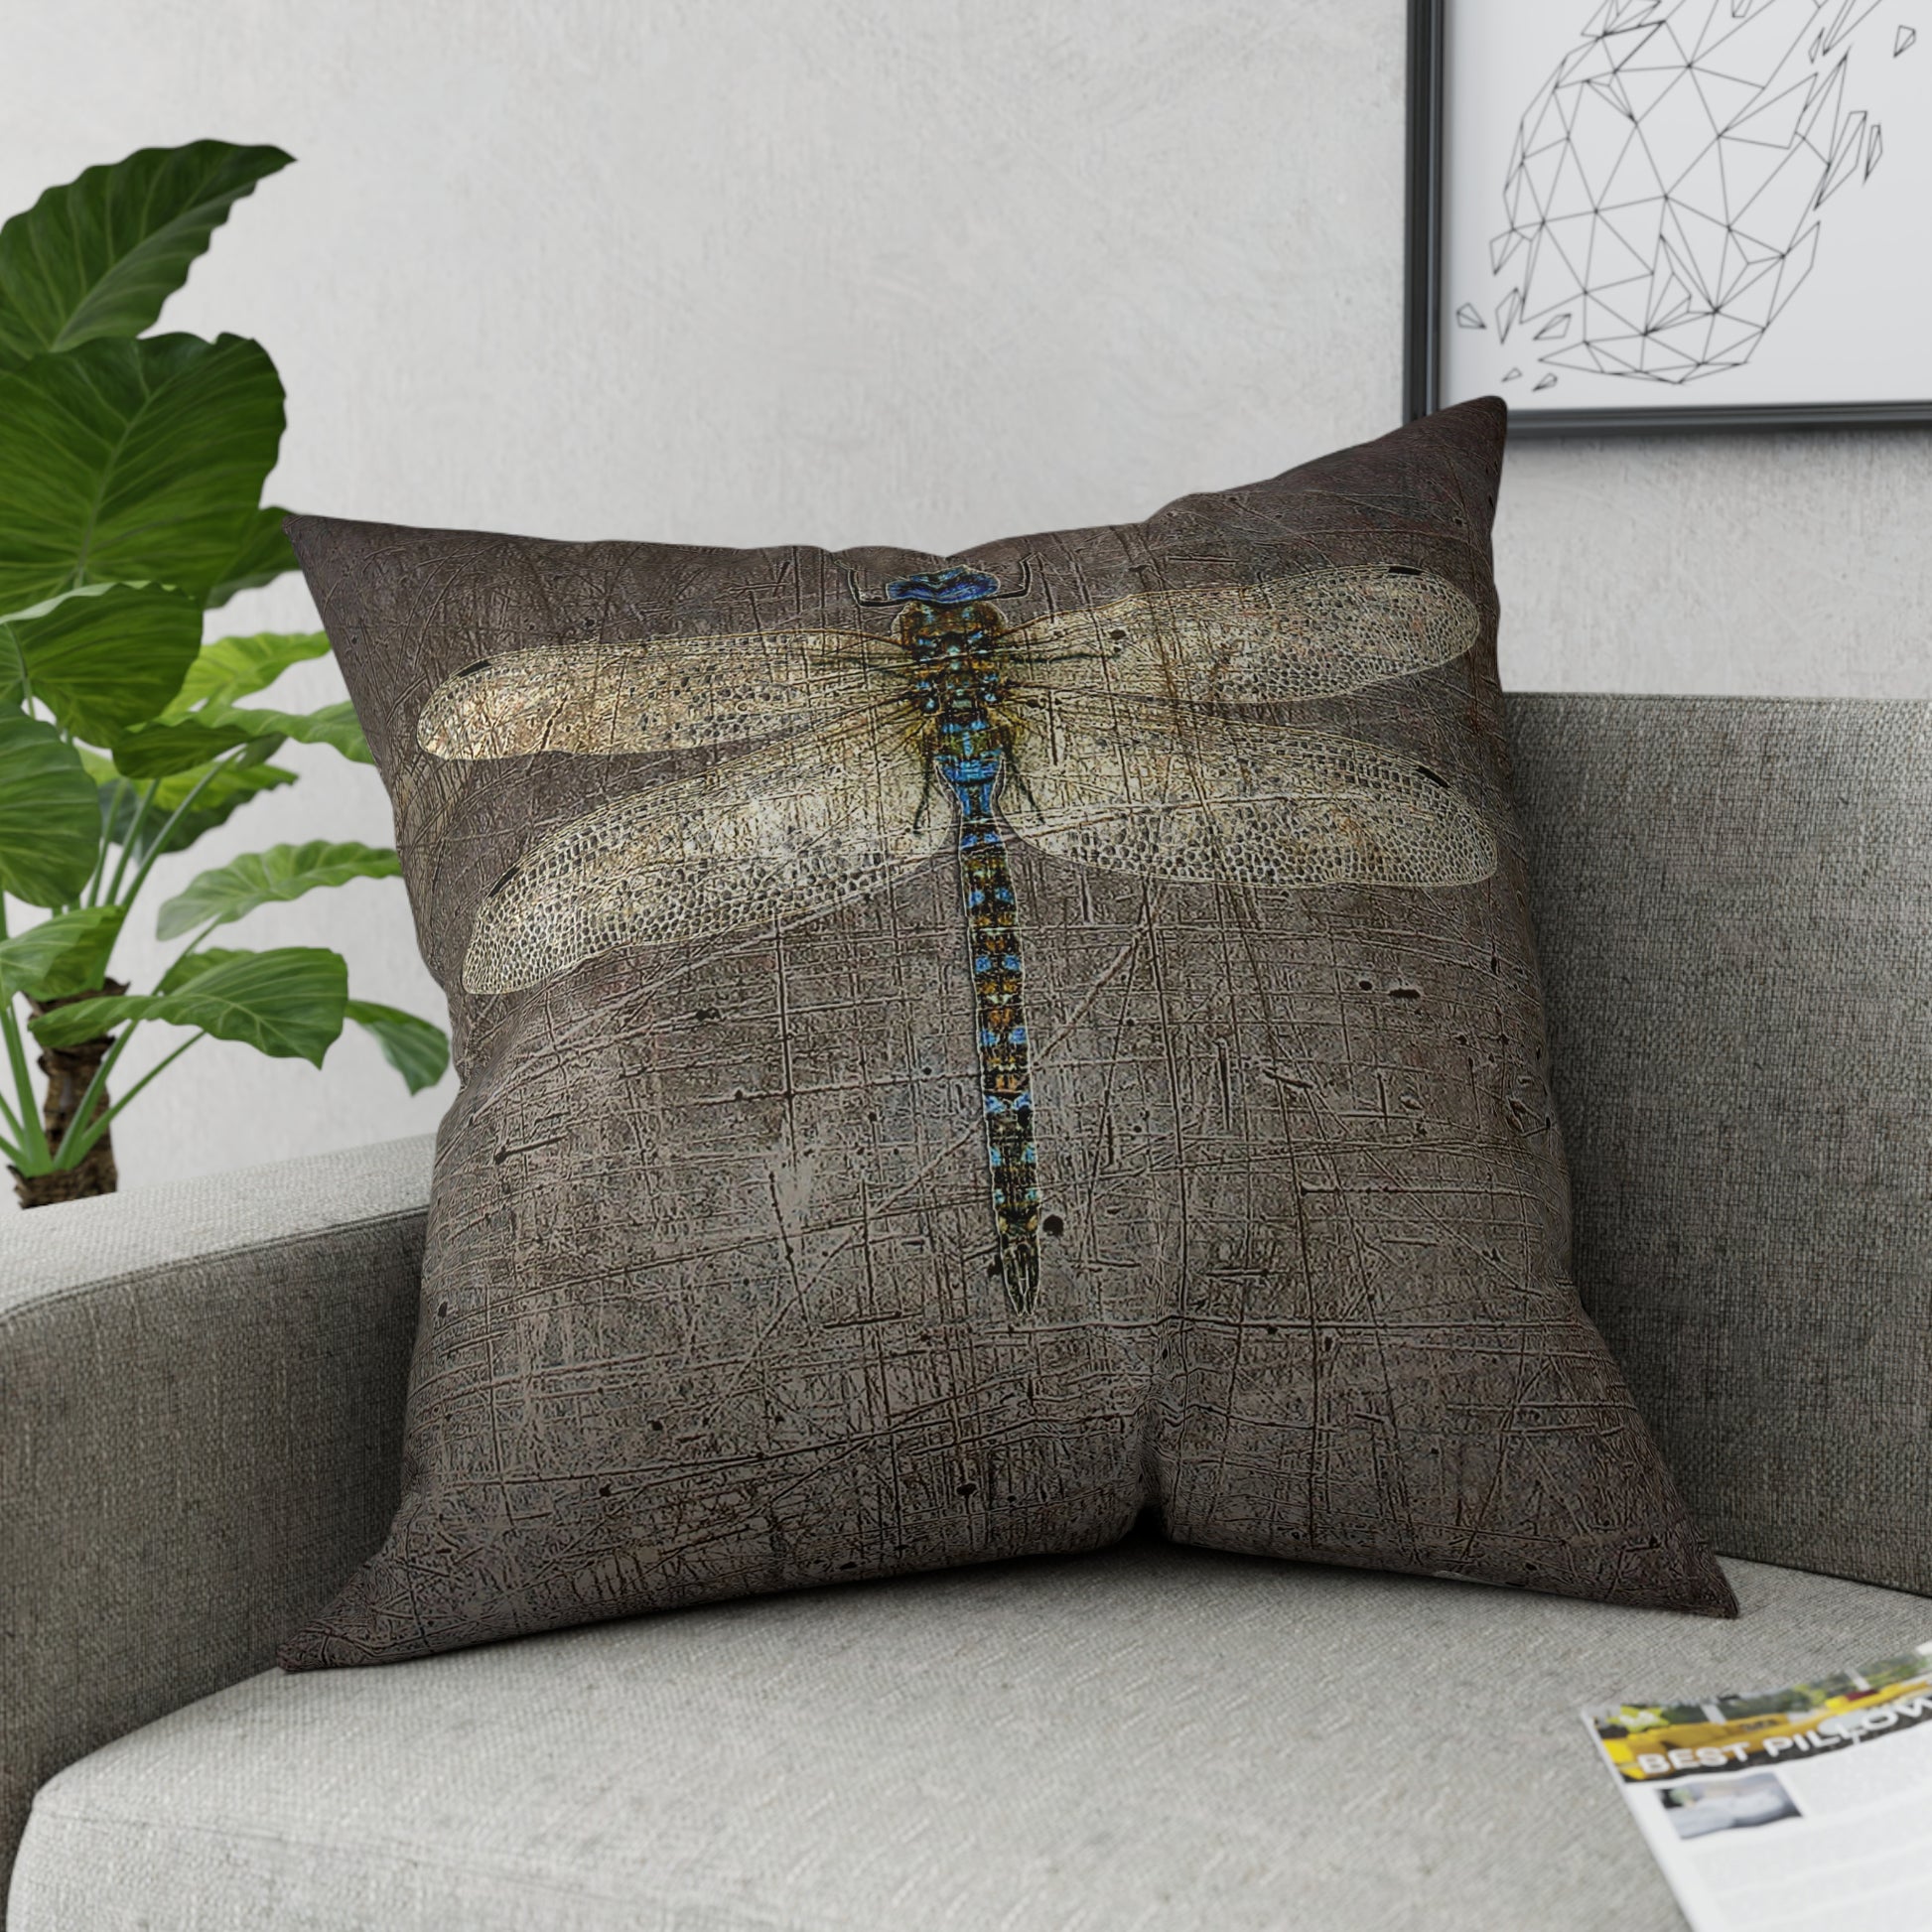 Large Double Sided Throw Pillow Dragonfly on Distressed Grey Stone Print - Dragonfly Themed Home Decor front on chaise